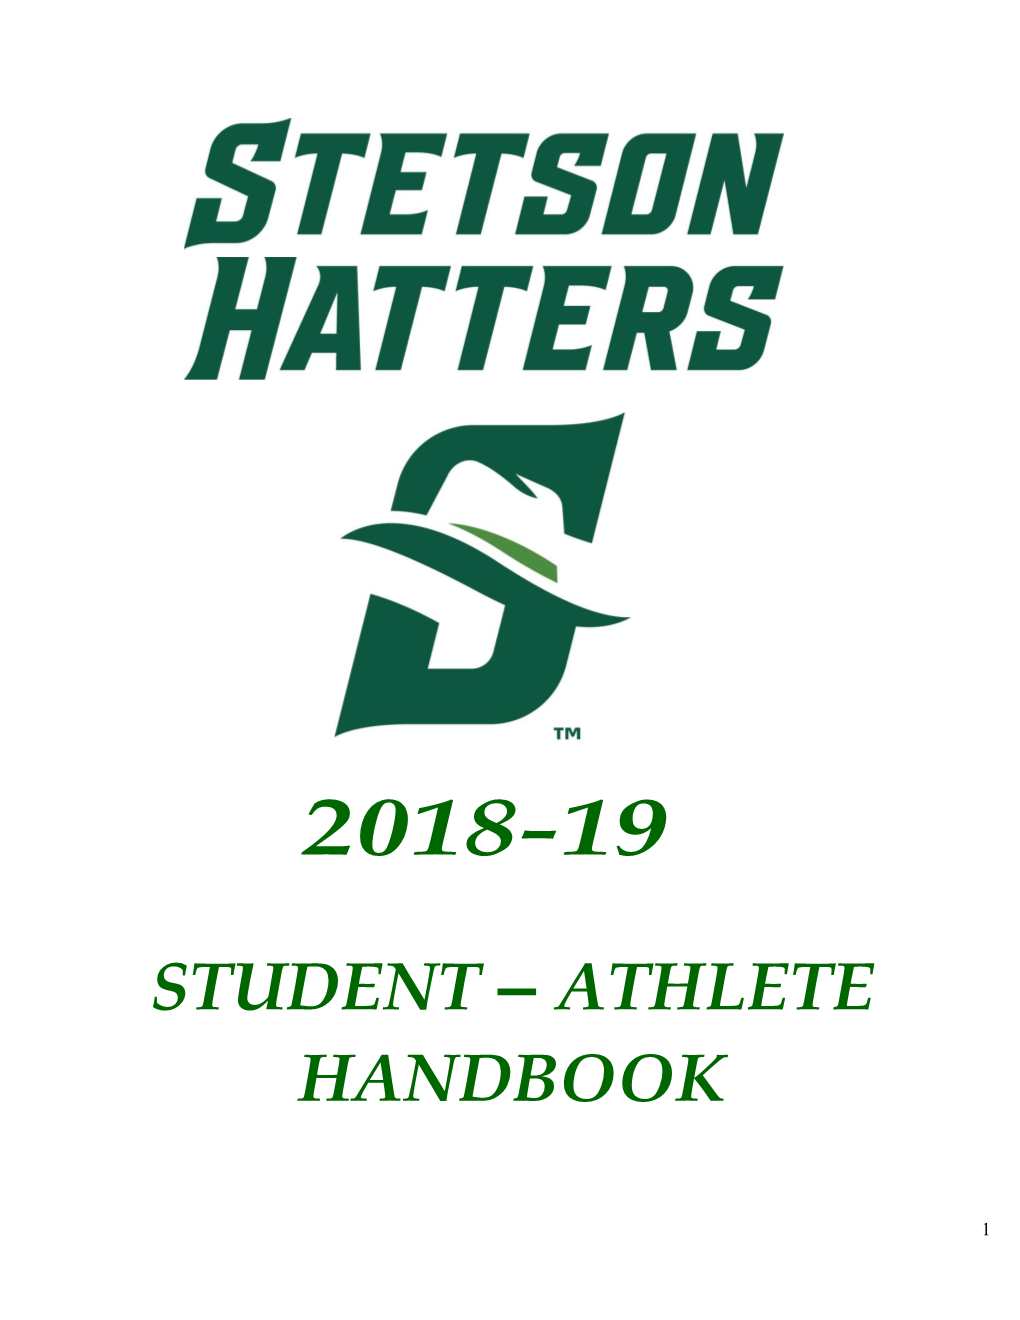 Stetson Athletics Recruits and Develops Student-Athletes, Coaches and Staff, Creating a Culture of Champions Within and Outside of Competition